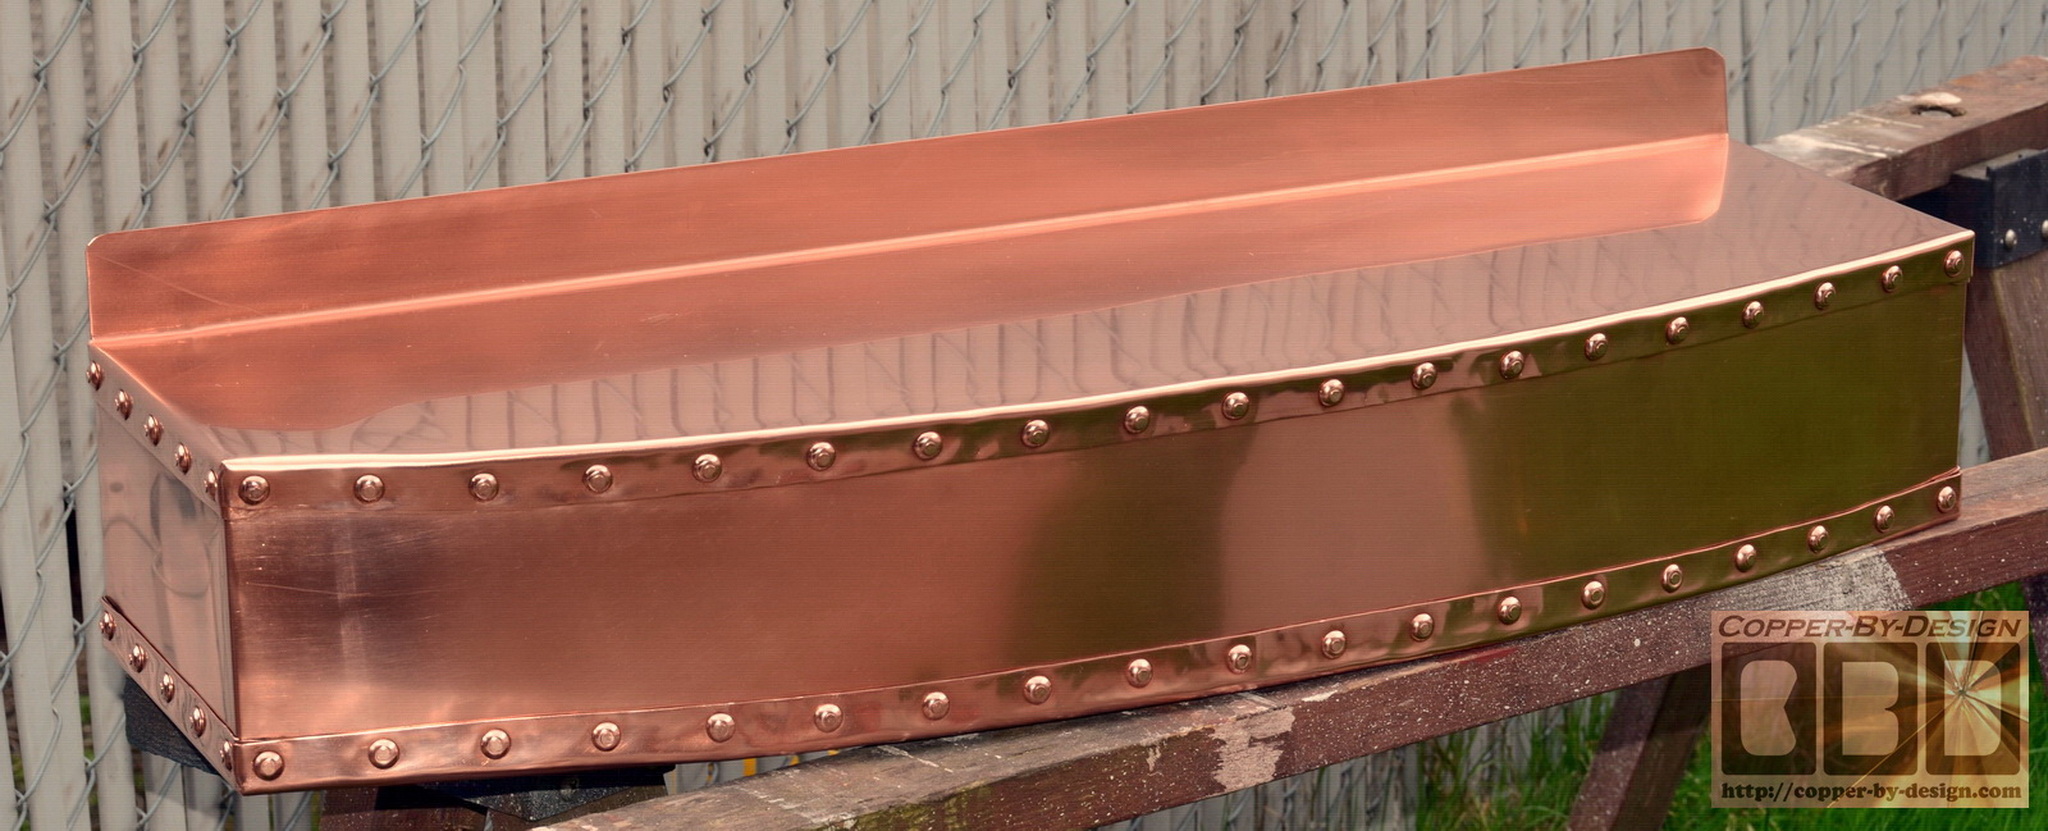 Where to Buy Copper Sheets and How to Use Them in Architectural Design